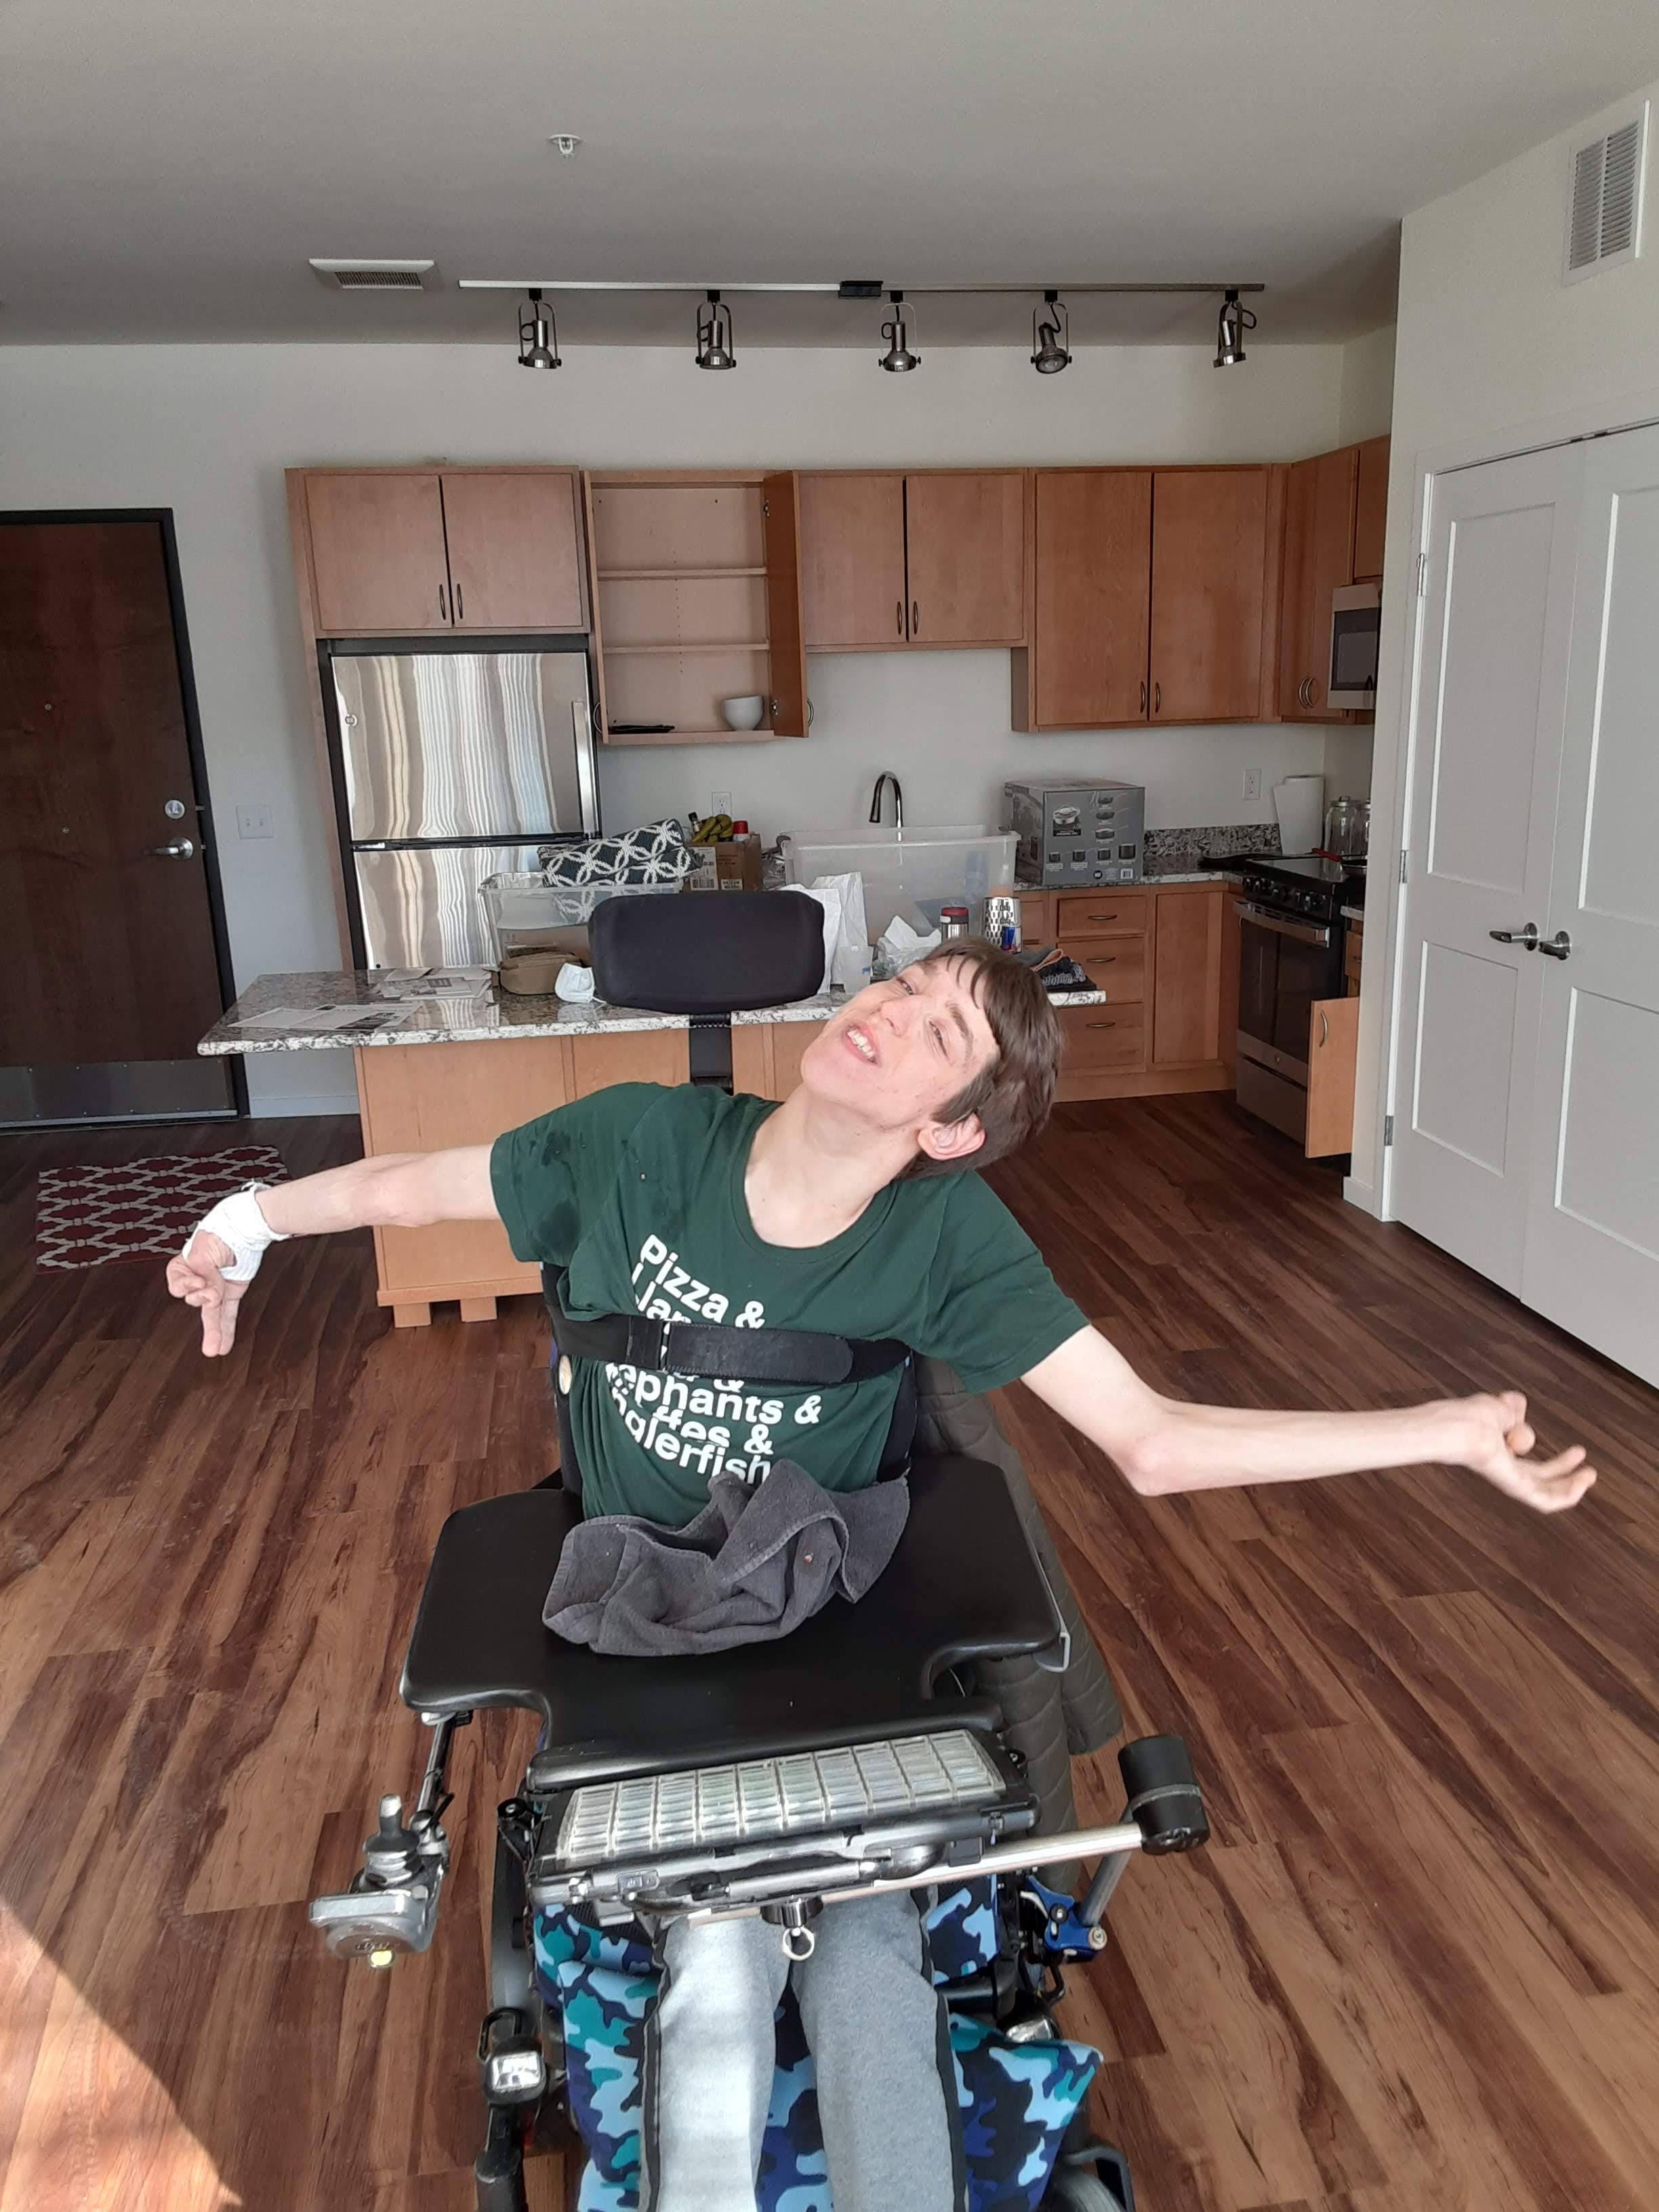 Justin in power wheelchair, smiling with arms outstretched in new empty apartment, kitchen behind him